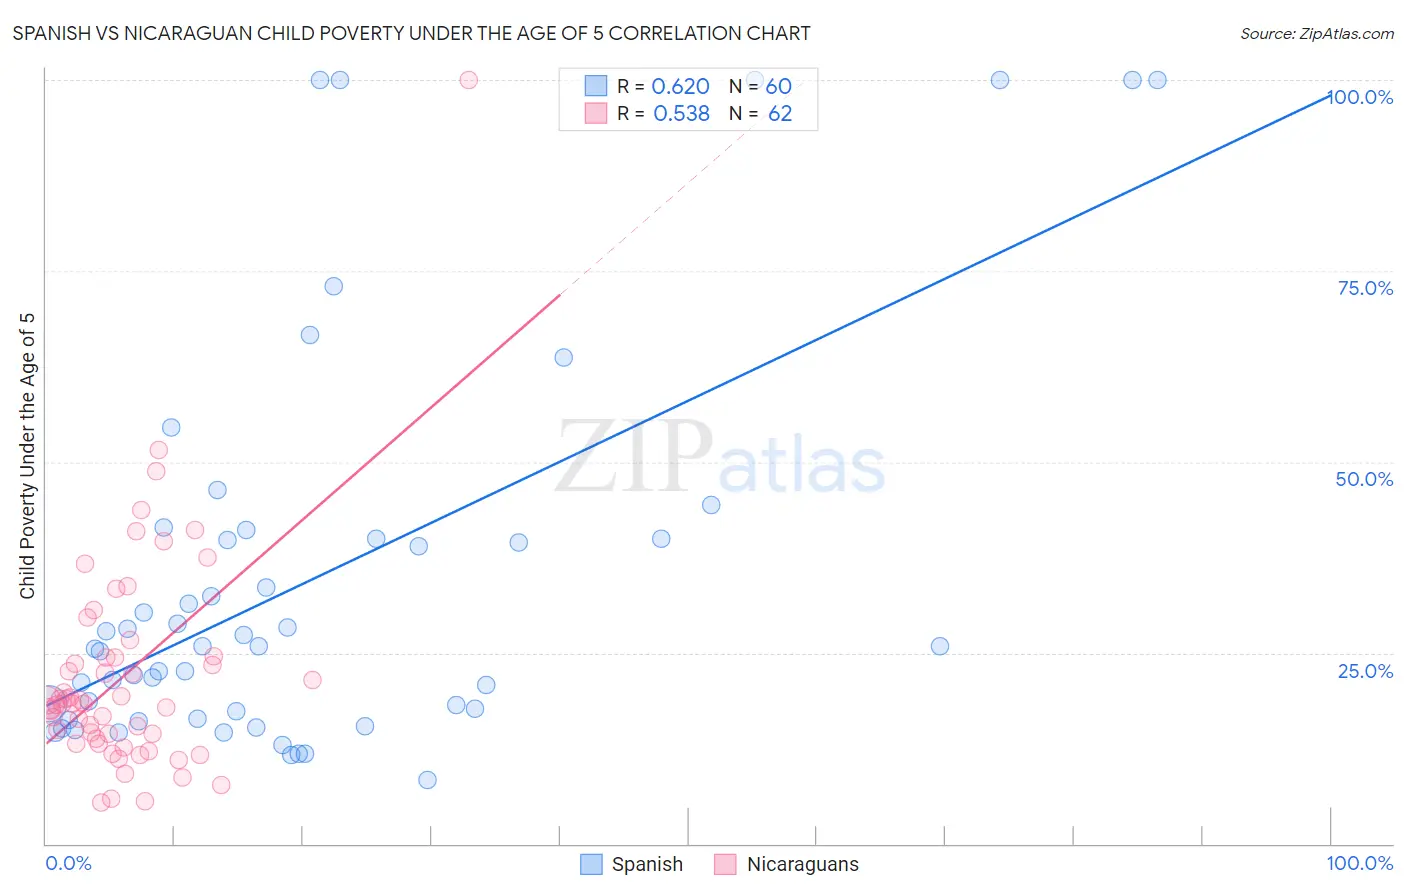 Spanish vs Nicaraguan Child Poverty Under the Age of 5